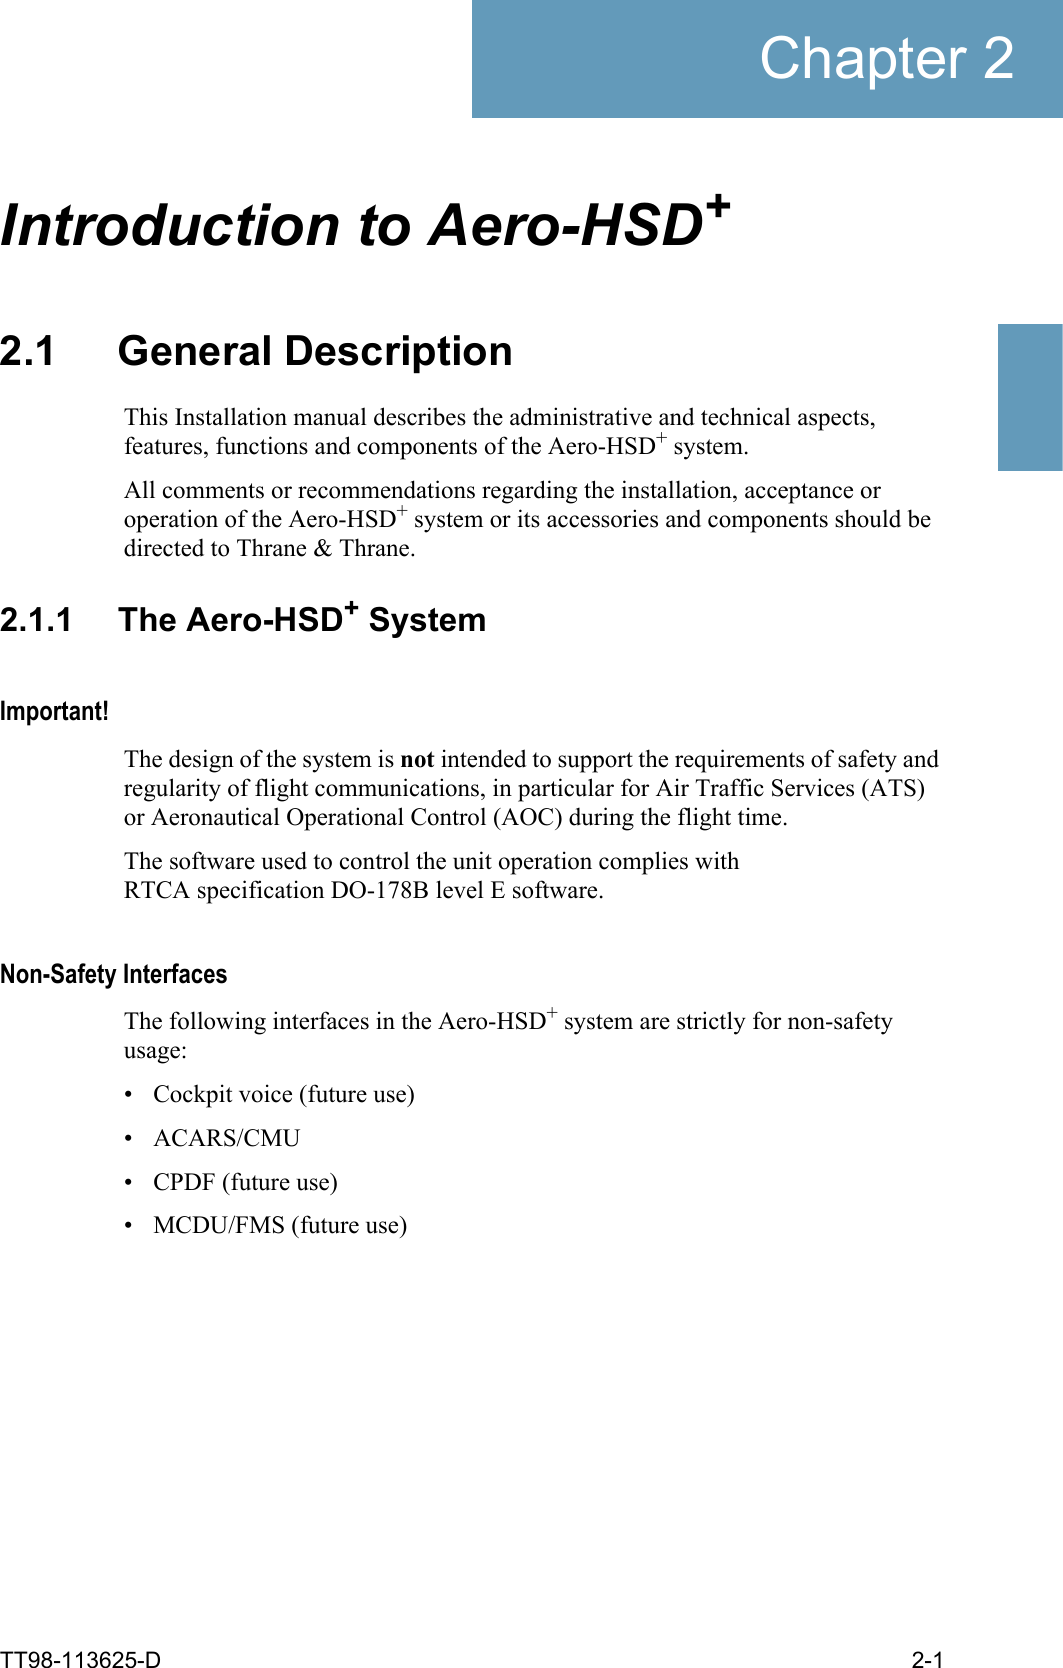 TT98-113625-D 2-1Chapter 22222Introduction to Aero-HSD+22.1 General DescriptionThis Installation manual describes the administrative and technical aspects, features, functions and components of the Aero-HSD+ system. All comments or recommendations regarding the installation, acceptance or operation of the Aero-HSD+ system or its accessories and components should be directed to Thrane &amp; Thrane.2.1.1 The Aero-HSD+ SystemImportant!The design of the system is not intended to support the requirements of safety and regularity of flight communications, in particular for Air Traffic Services (ATS) or Aeronautical Operational Control (AOC) during the flight time. The software used to control the unit operation complies with RTCA specification DO-178B level E software. Non-Safety InterfacesThe following interfaces in the Aero-HSD+ system are strictly for non-safety usage:• Cockpit voice (future use)• ACARS/CMU• CPDF (future use)• MCDU/FMS (future use)